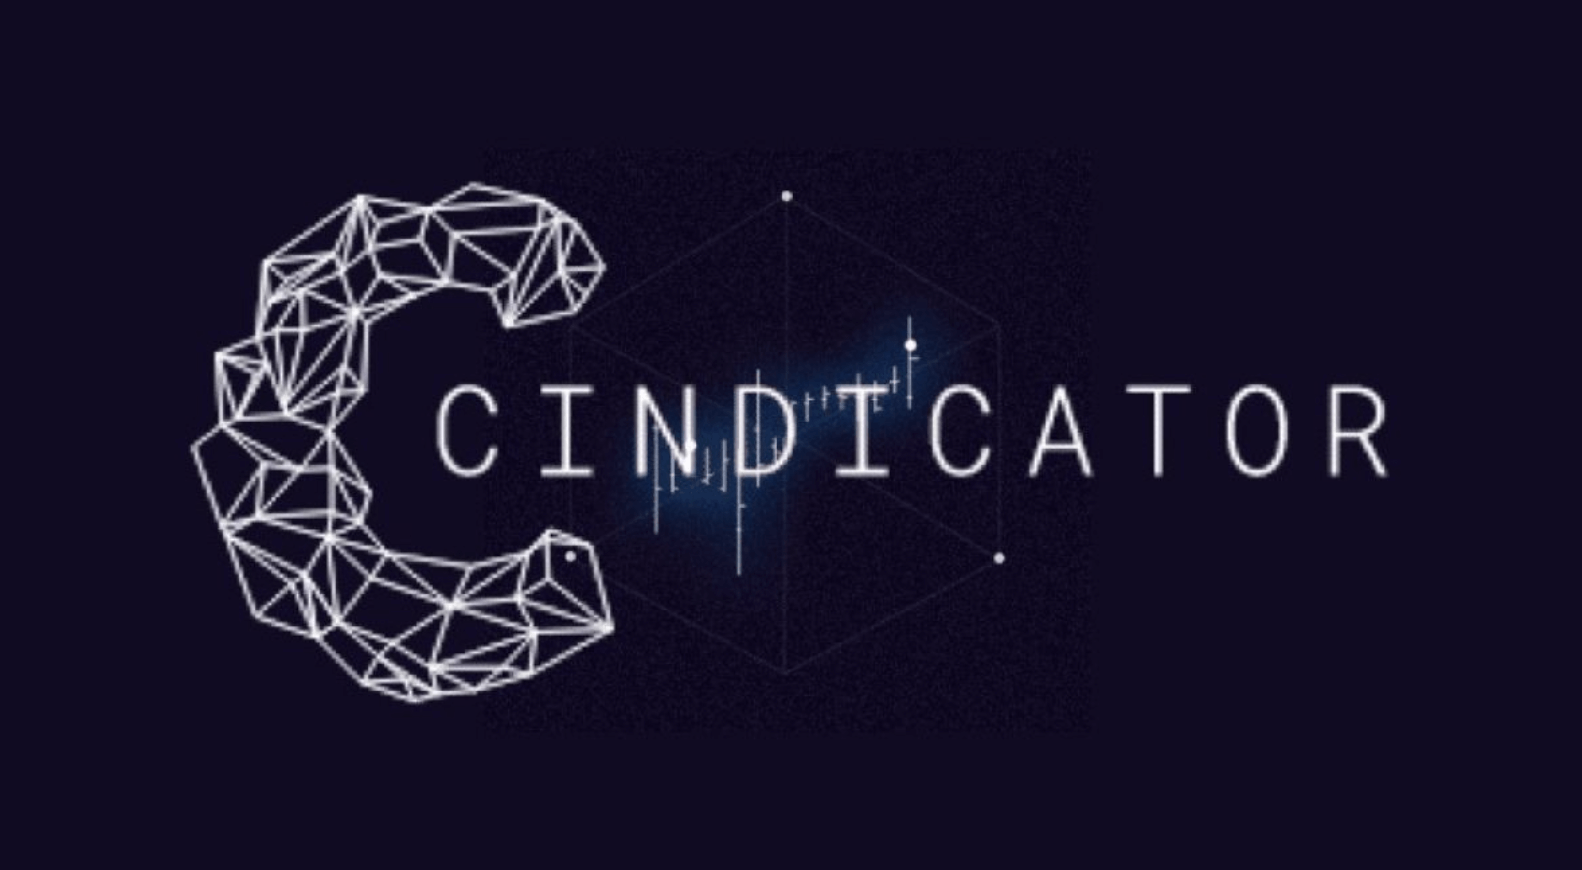 How to Buy Cindicator Coin?